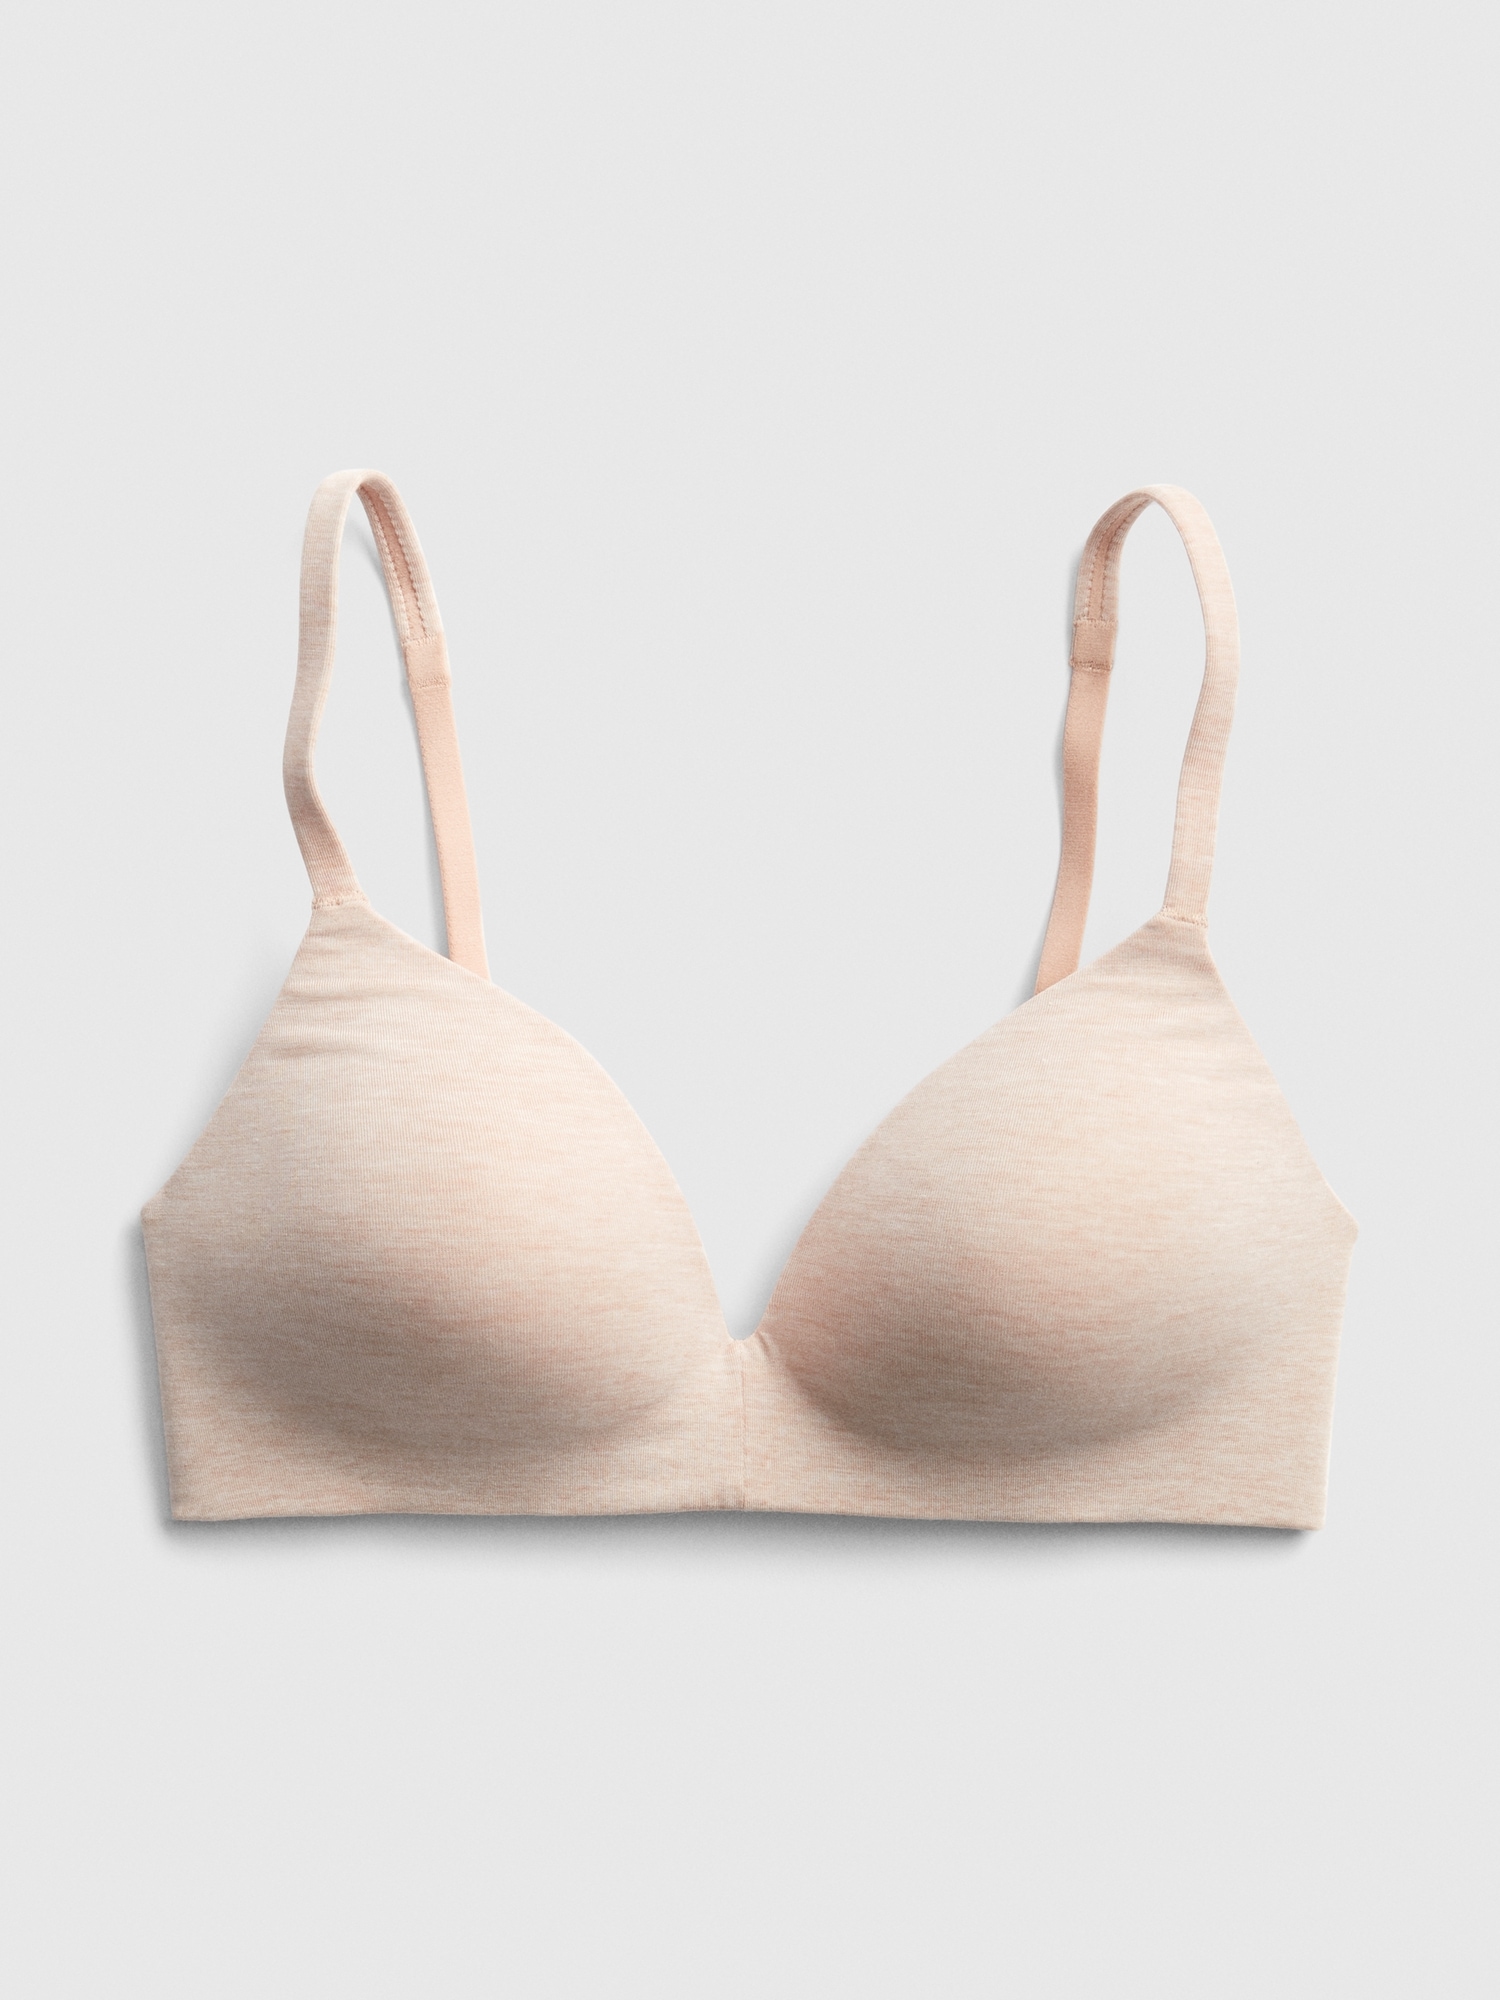 Buy MELETE Bra that makes your chest look smaller Bra that makes your big  chest look smaller Bra that makes your chest look smaller Smart bra Exposed bra  Large size Non-wire bra